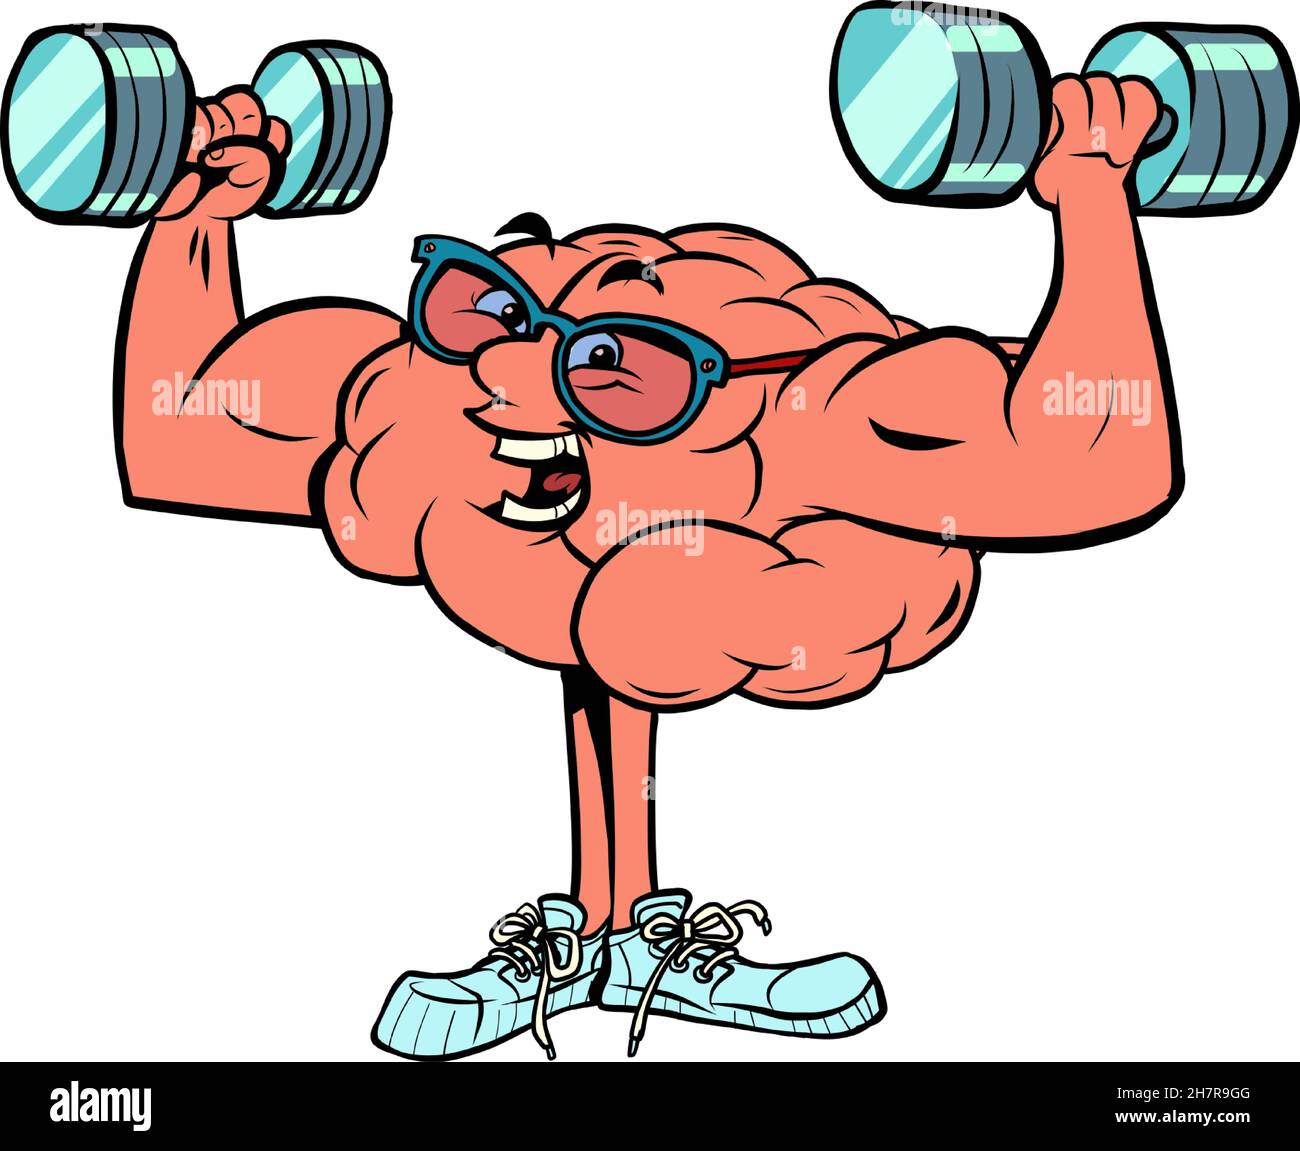 morning exercises, lifting dumbbells, weightlifting human brain character, smart wise Stock Vector